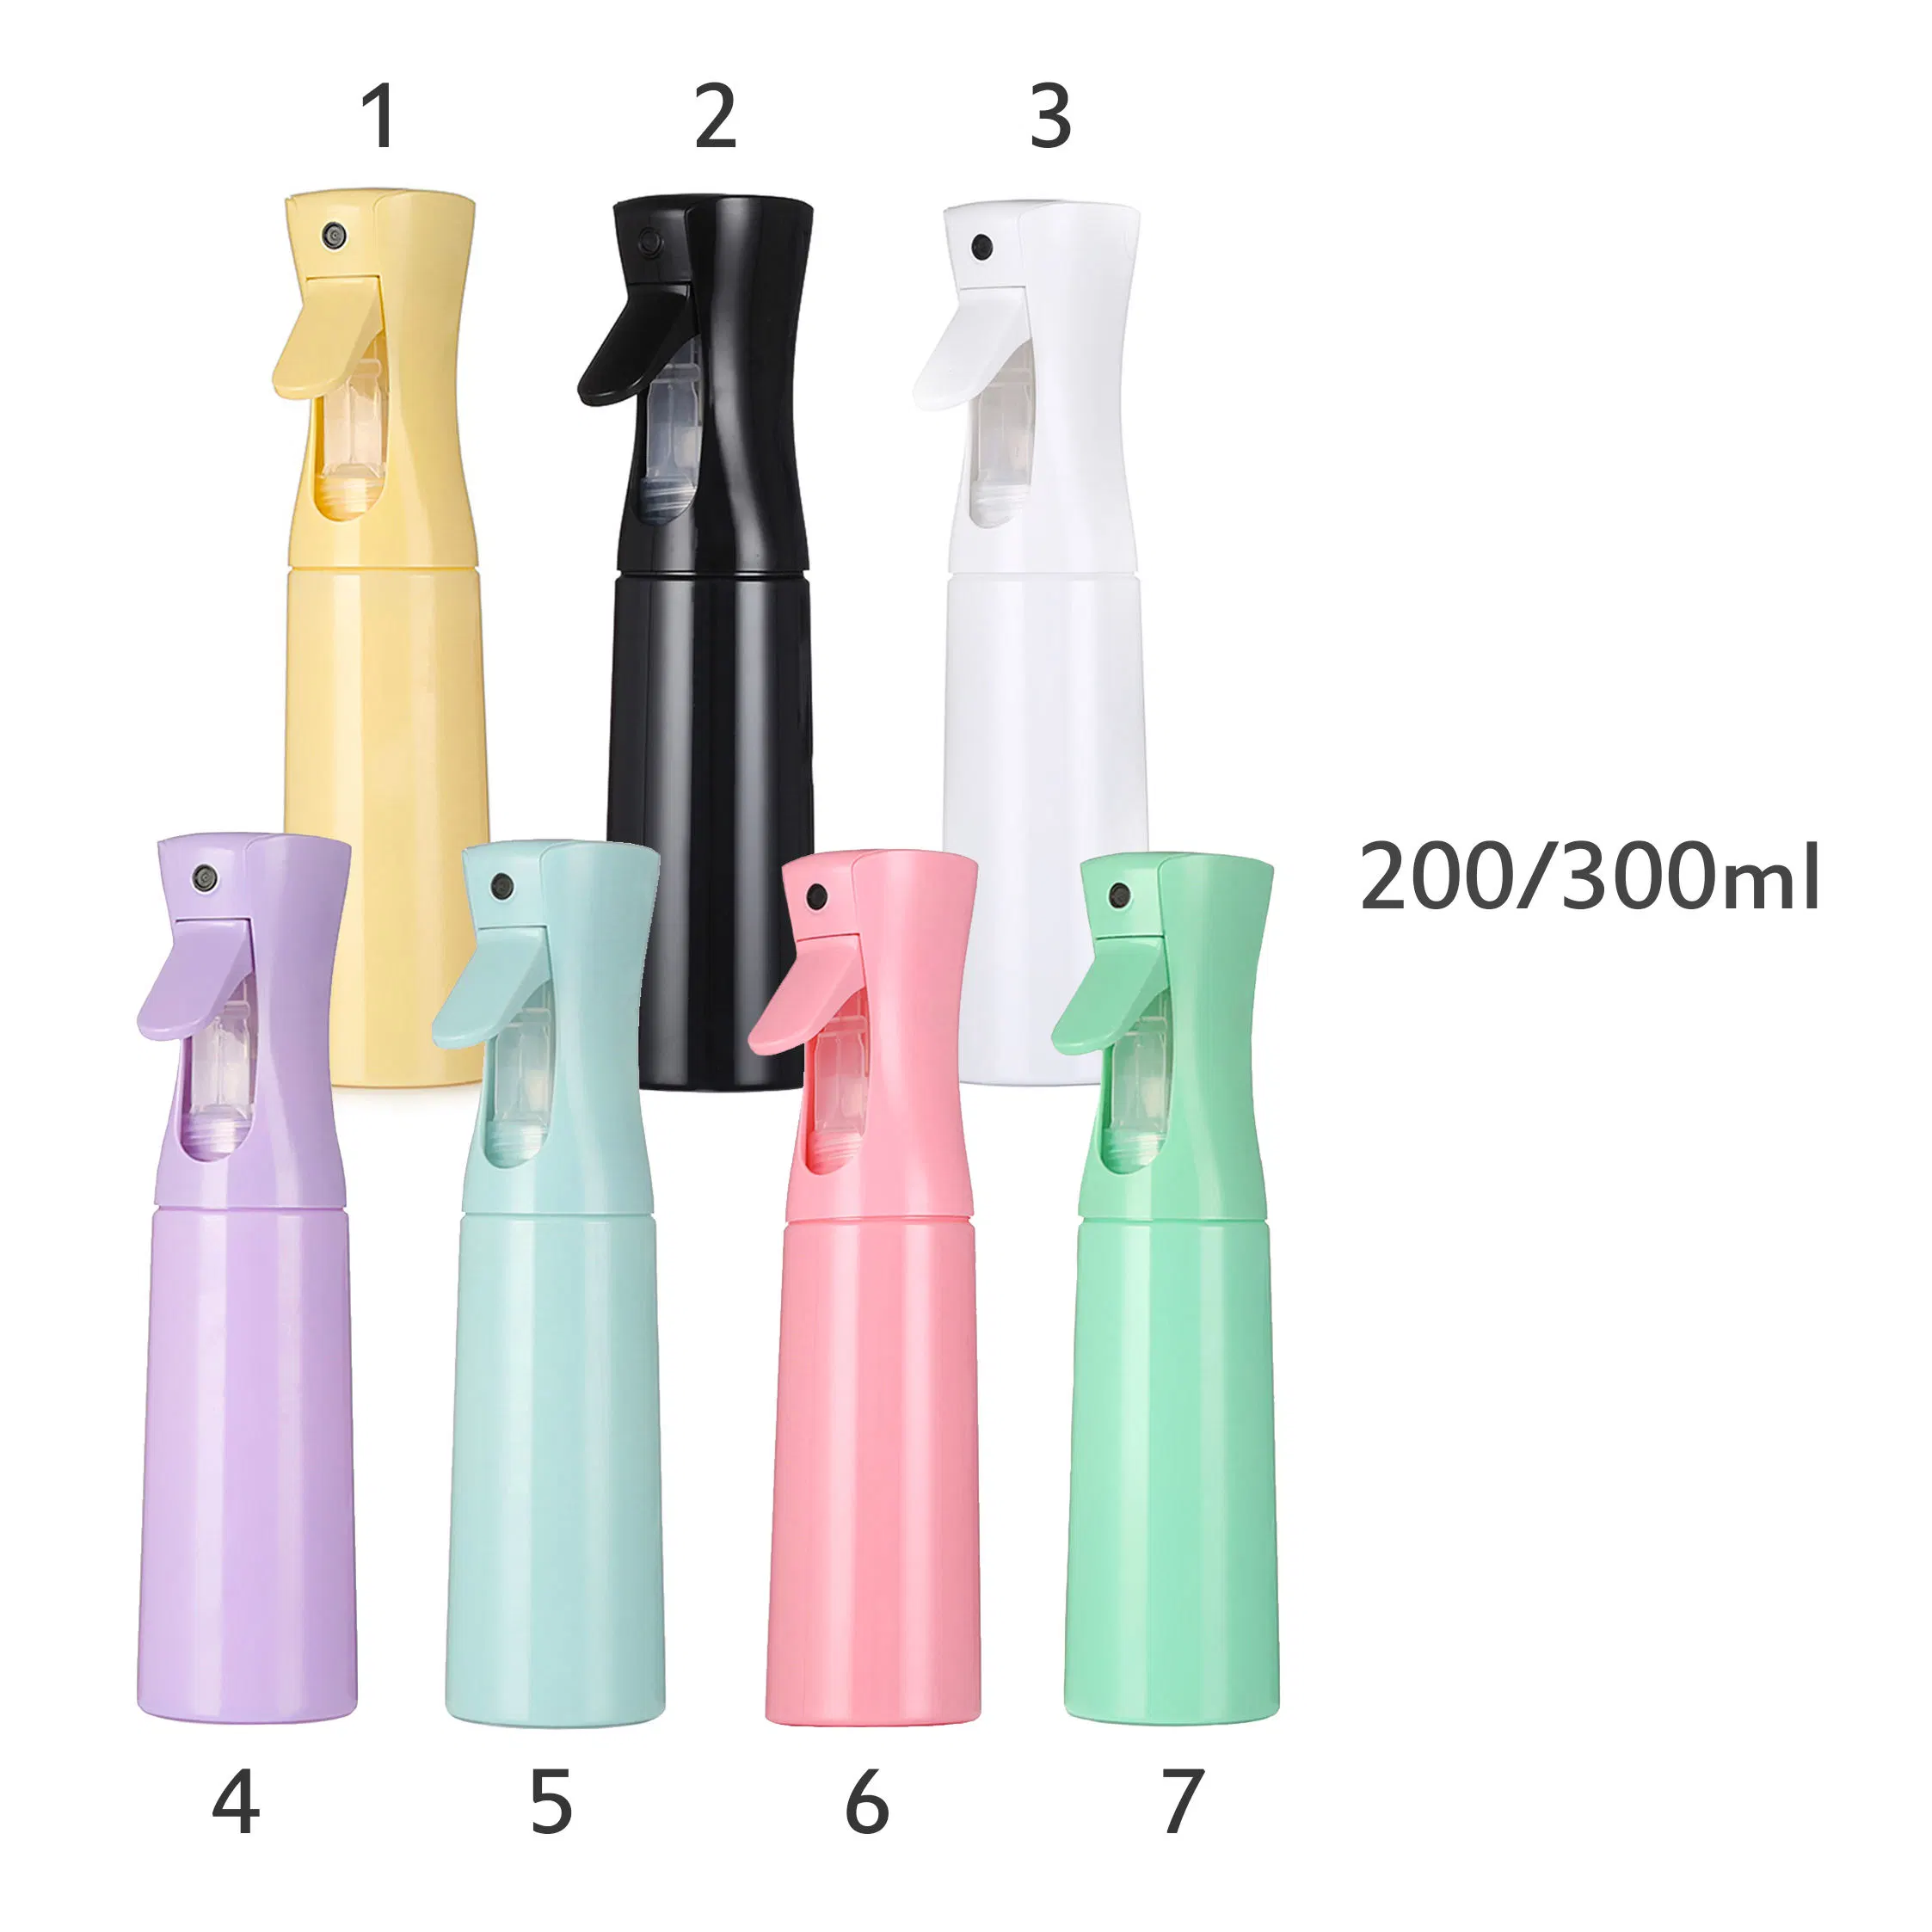 Household Products Fine Continuous Mist Pet Plastic Water Spray Bottles